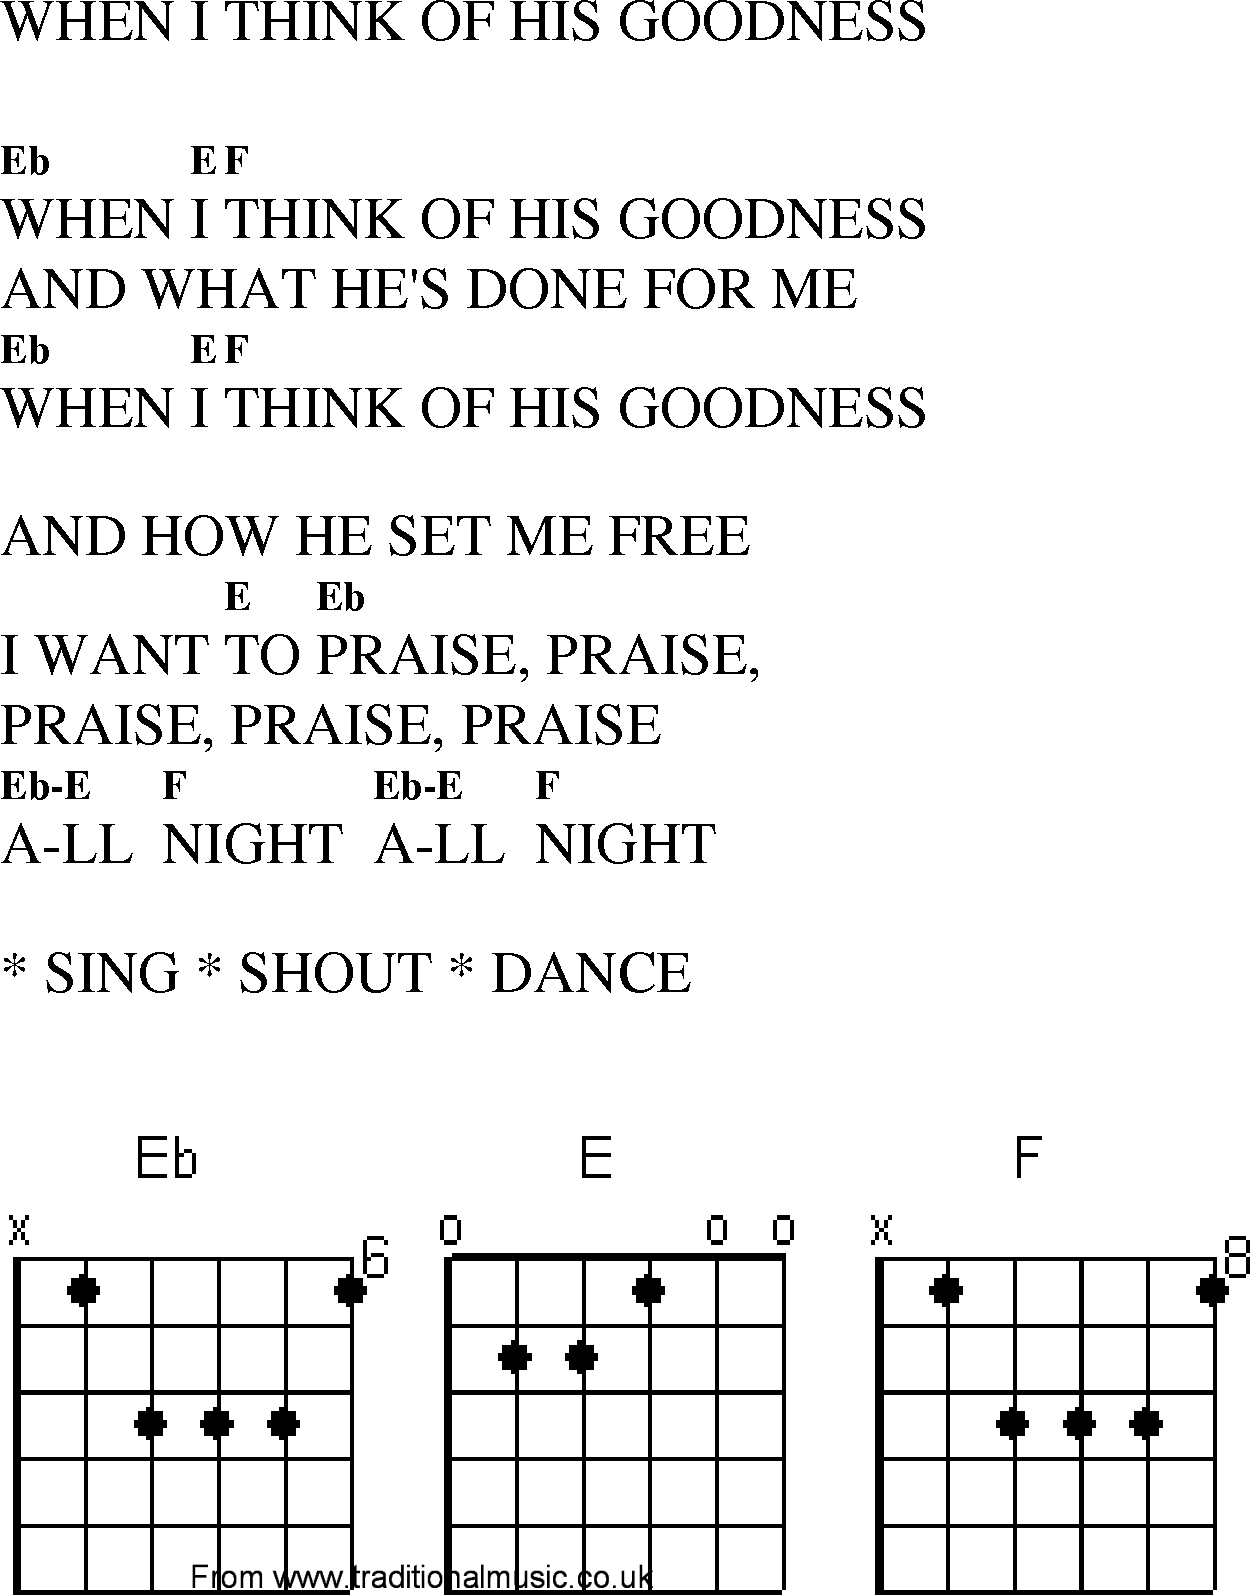 Gospel Song: when_i_think_of_his_goodness, lyrics and chords.